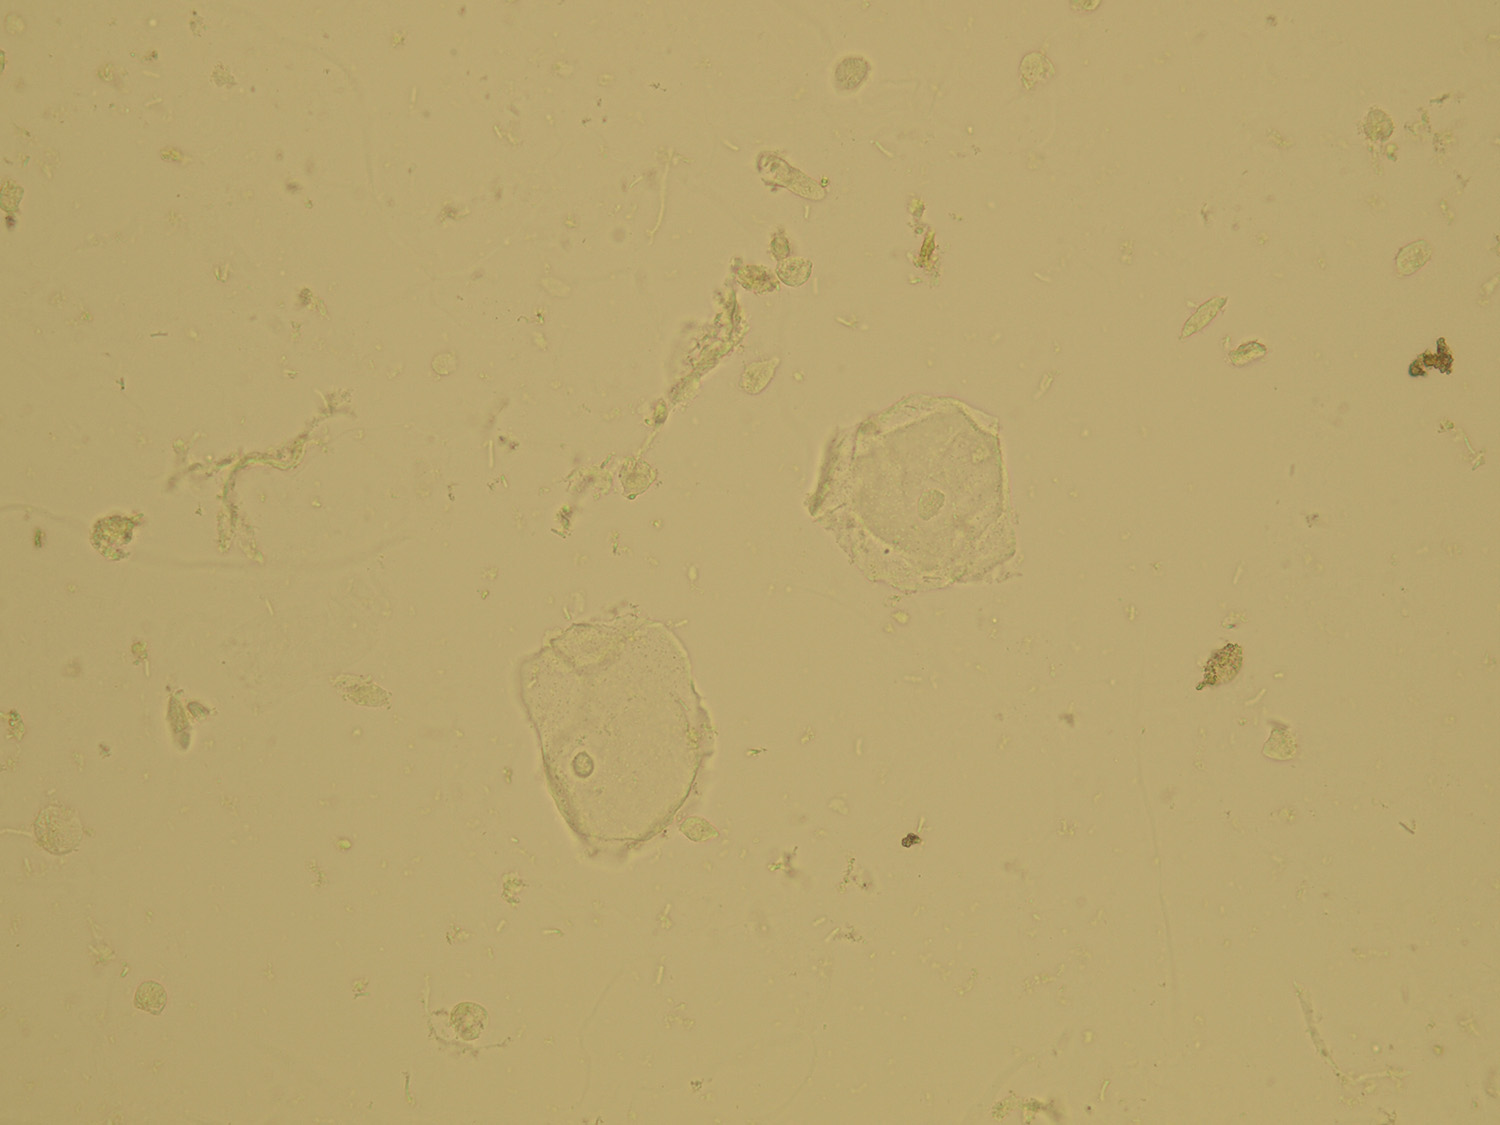 Squamous Epithelial Cells in Urine - healthheartycom